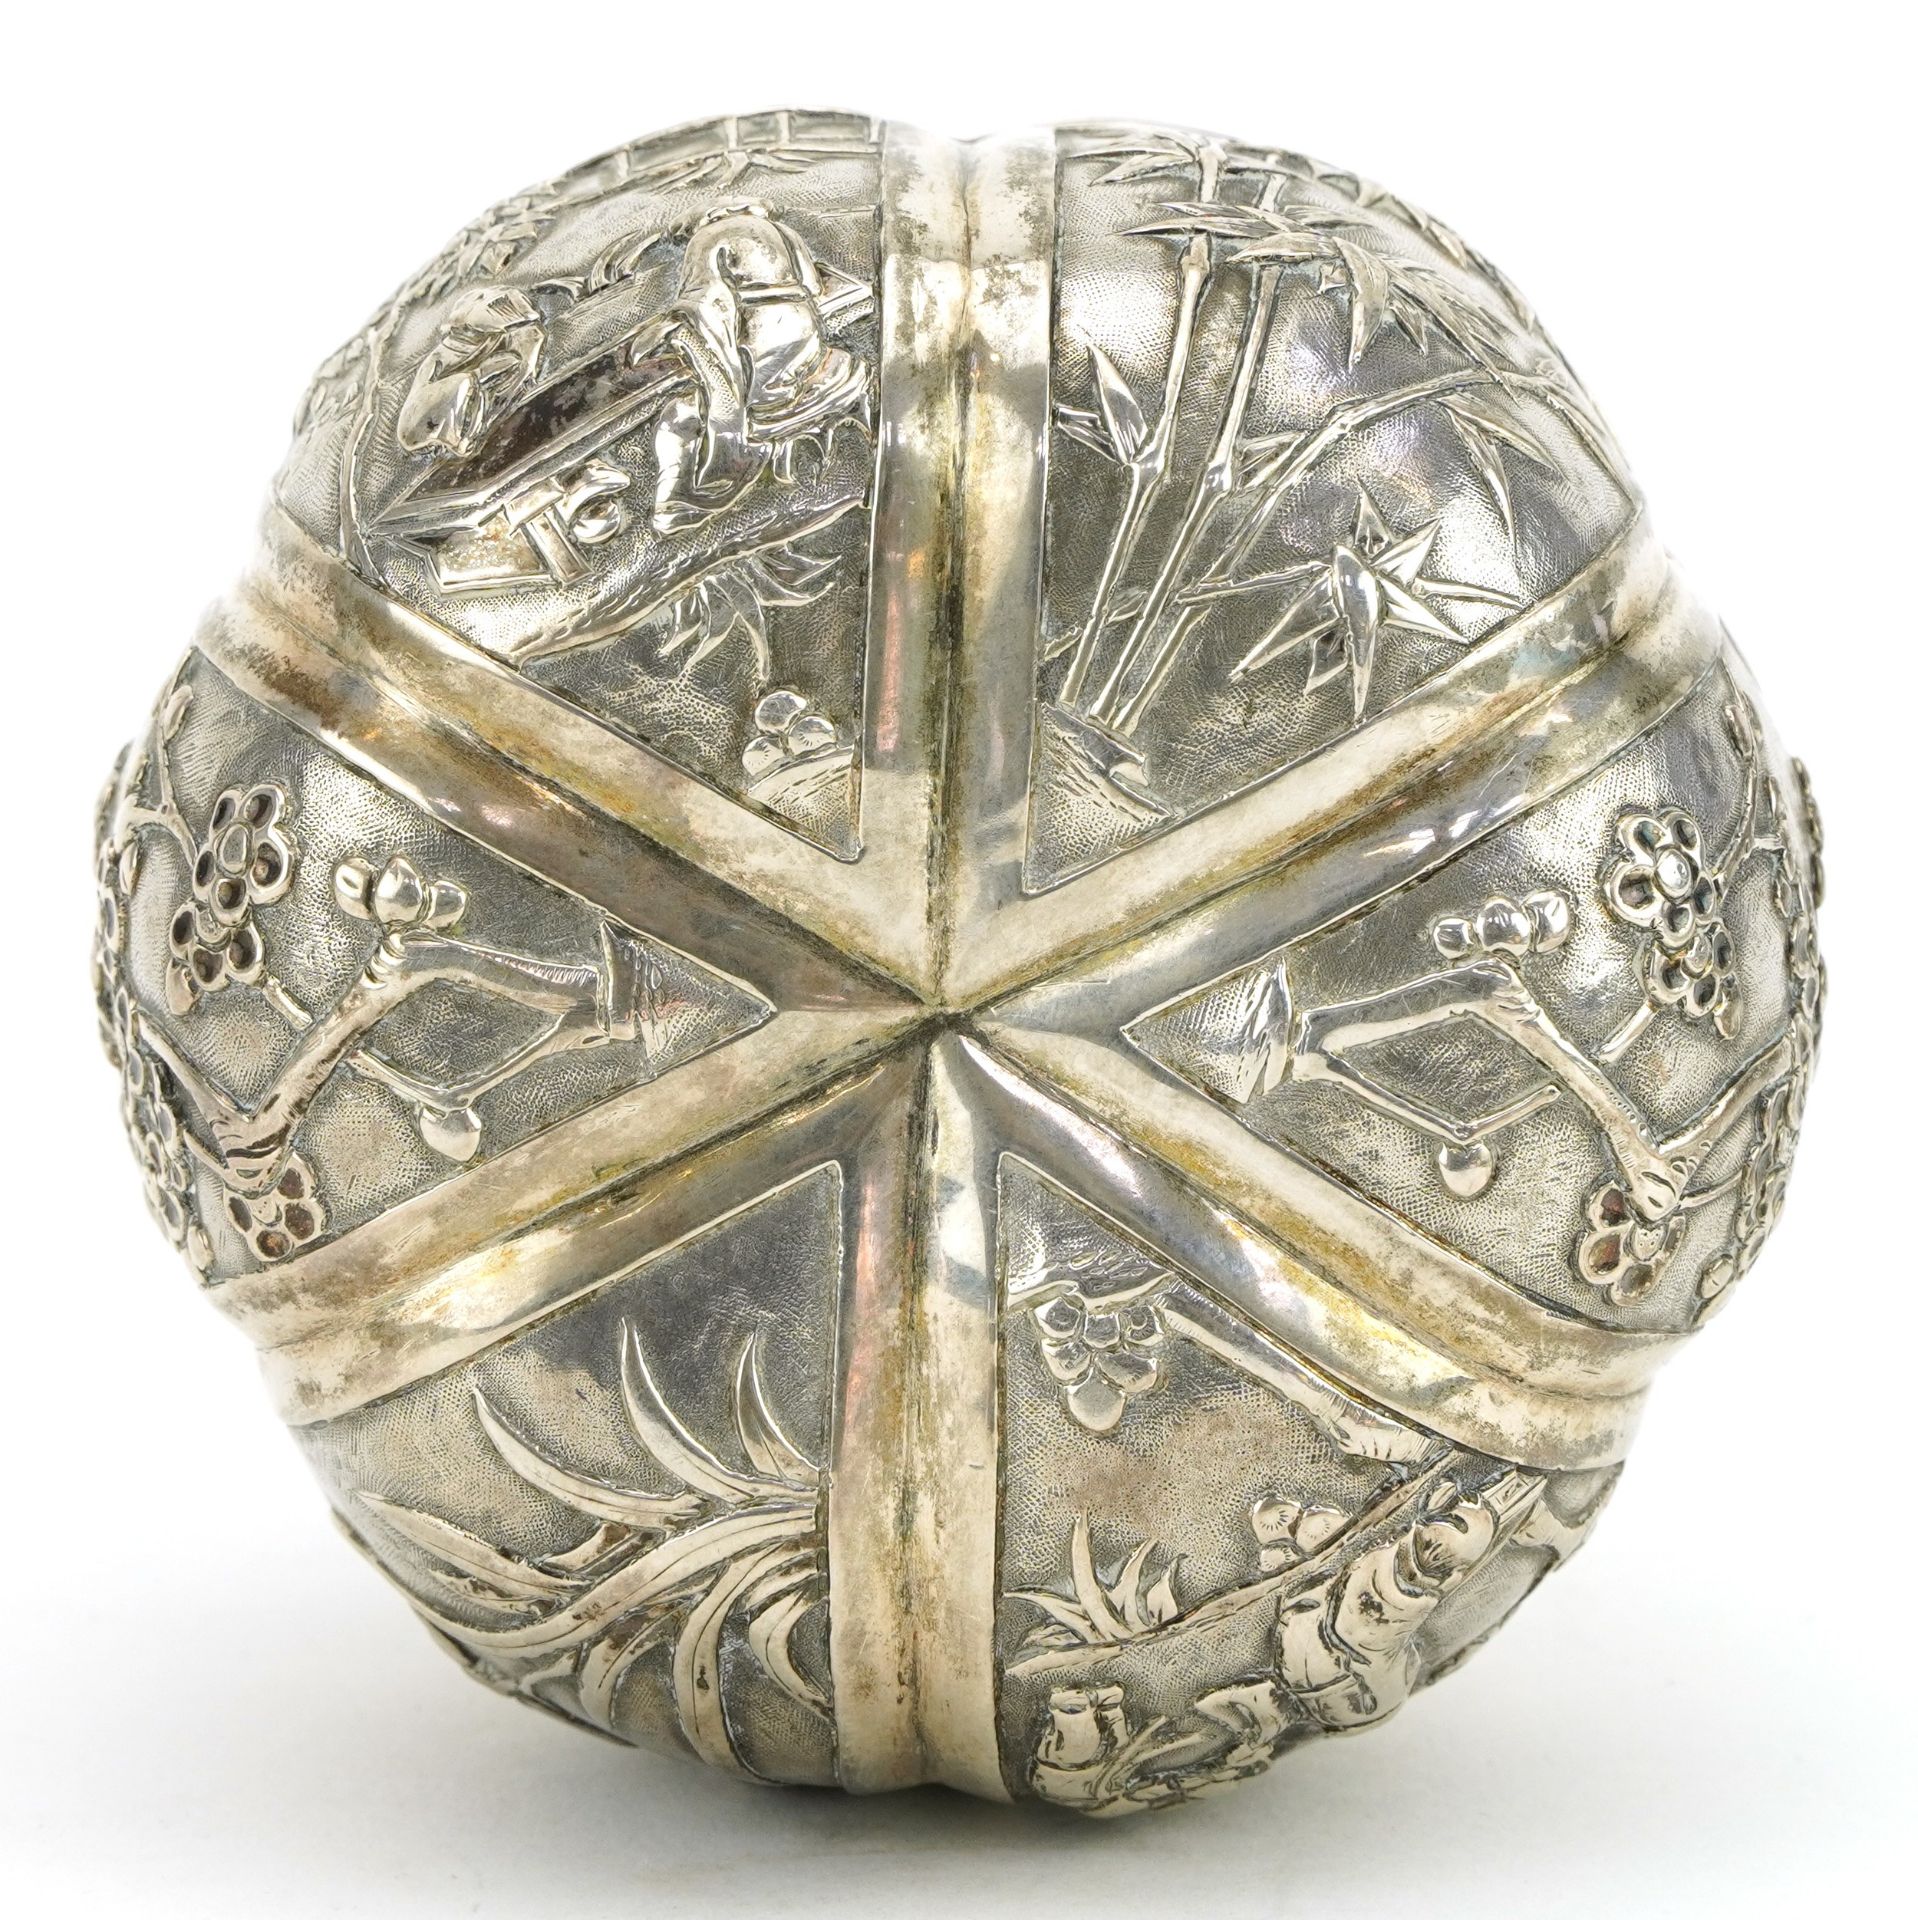 Good Chinese export silver box and cover in the form of a pumpkin embossed with figures, bamboo - Image 11 of 12